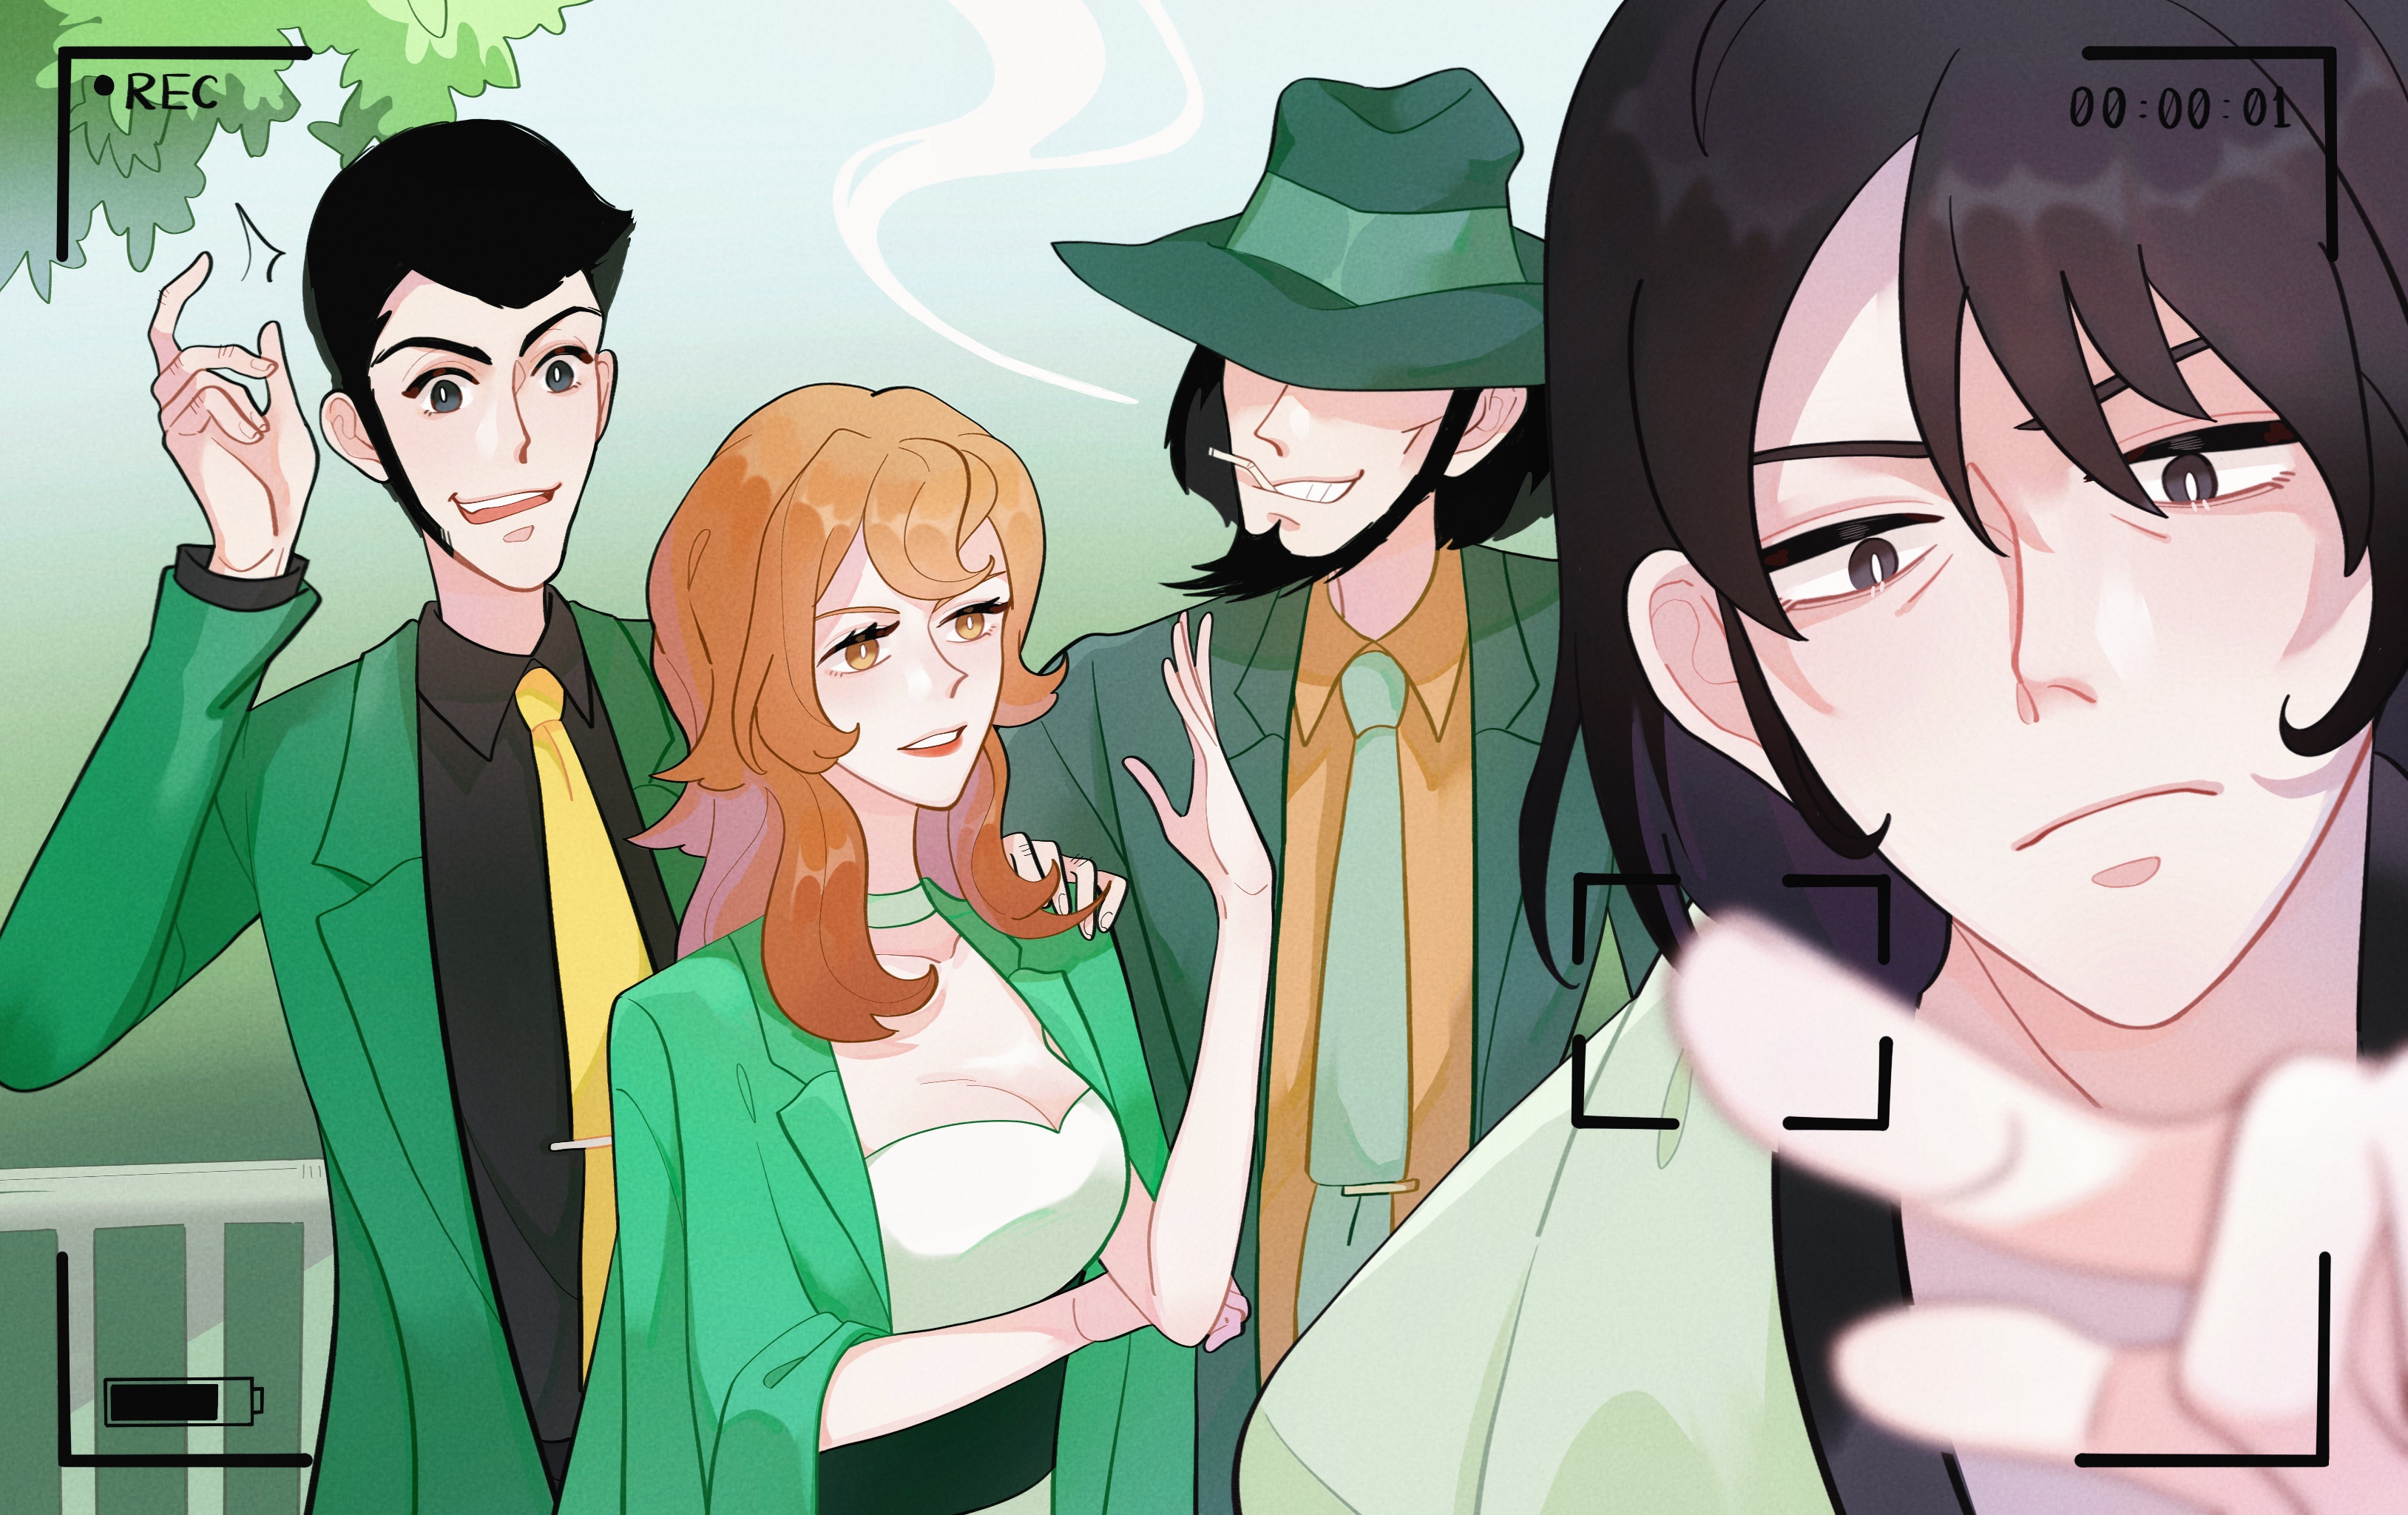 lupin the third icons | Lupin iii, Aesthetic anime, Anime